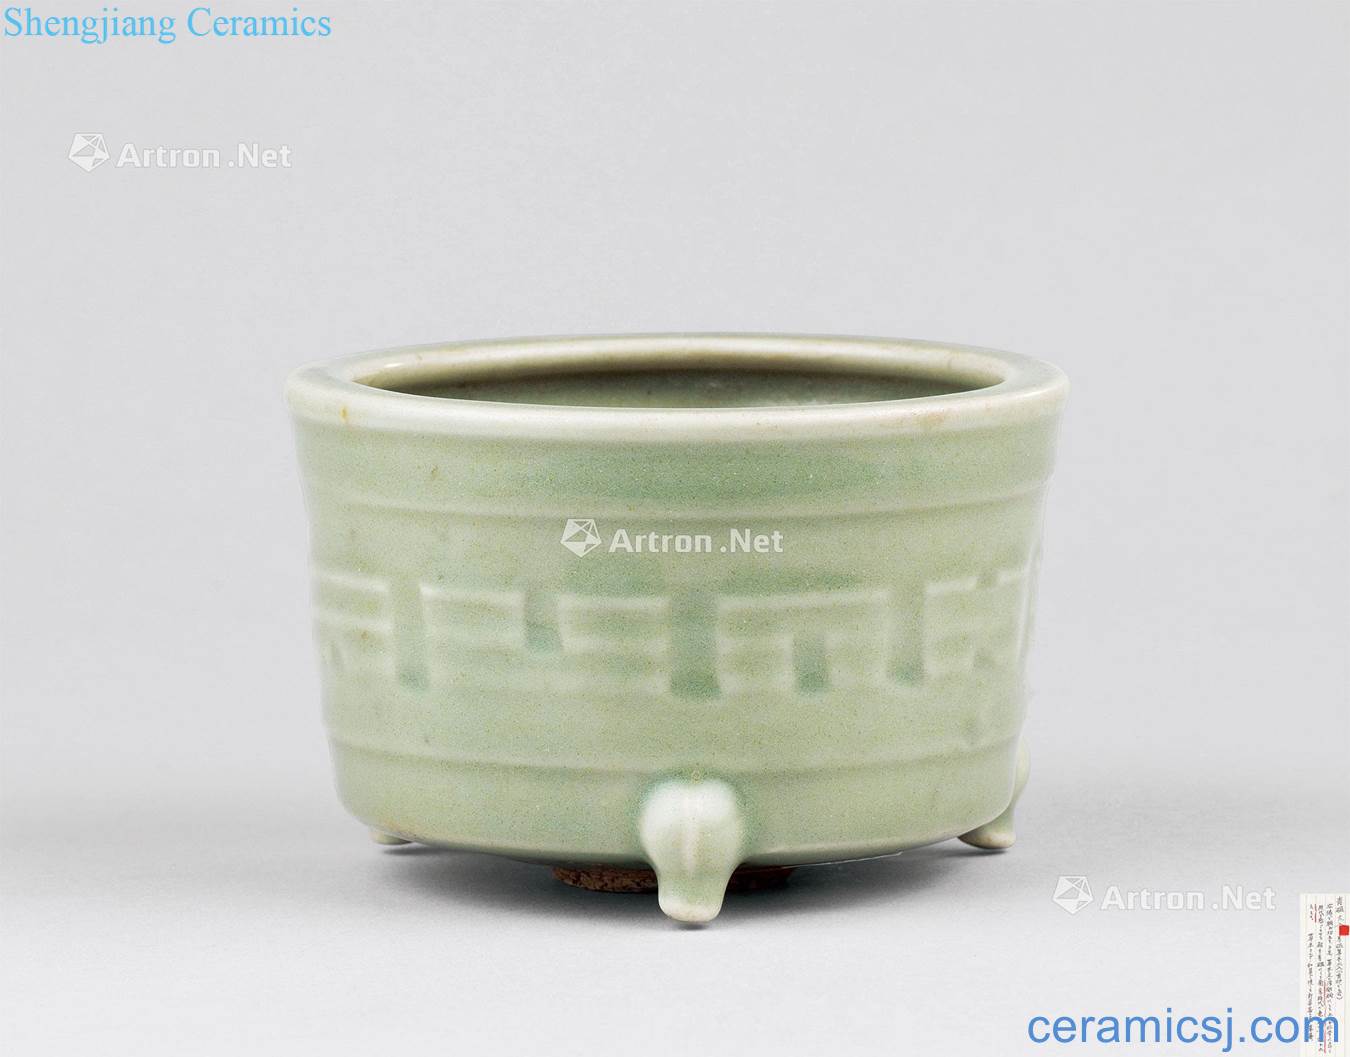 The southern song dynasty (1127-1279), longquan celadon gossip wen incense burner with three legs